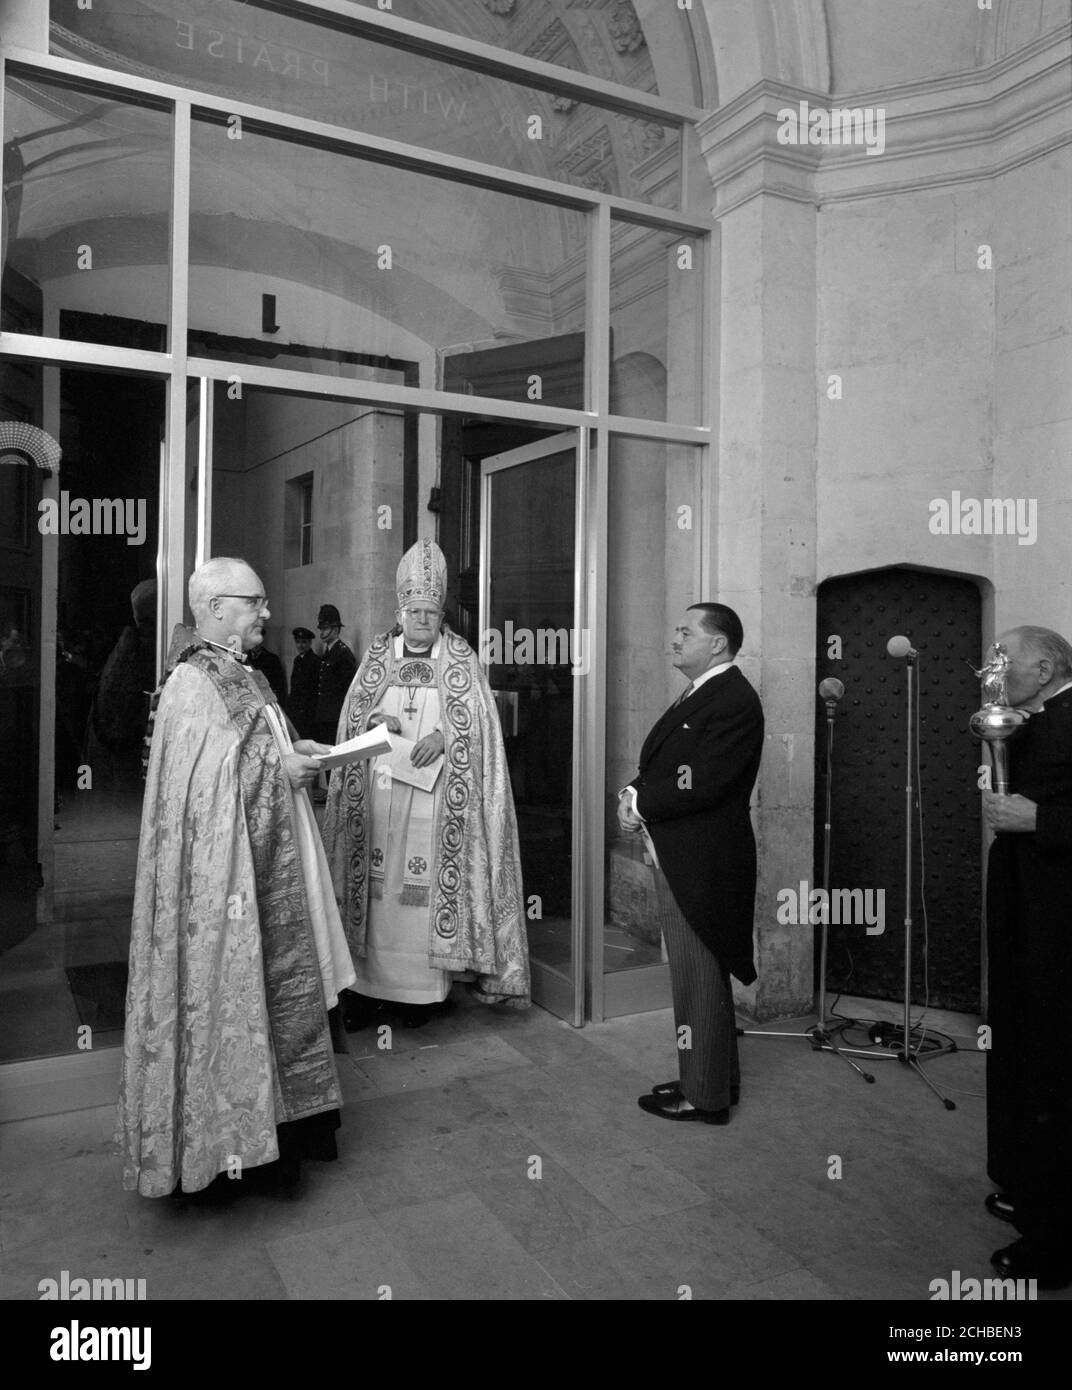 Dr Michael Ramsey, the Archbishop of Canterbury, during his dedication of the glass inner doors presented to St Bride's Church, London, by the Press Association to commemorate the news agency's 100th year. Stock Photo